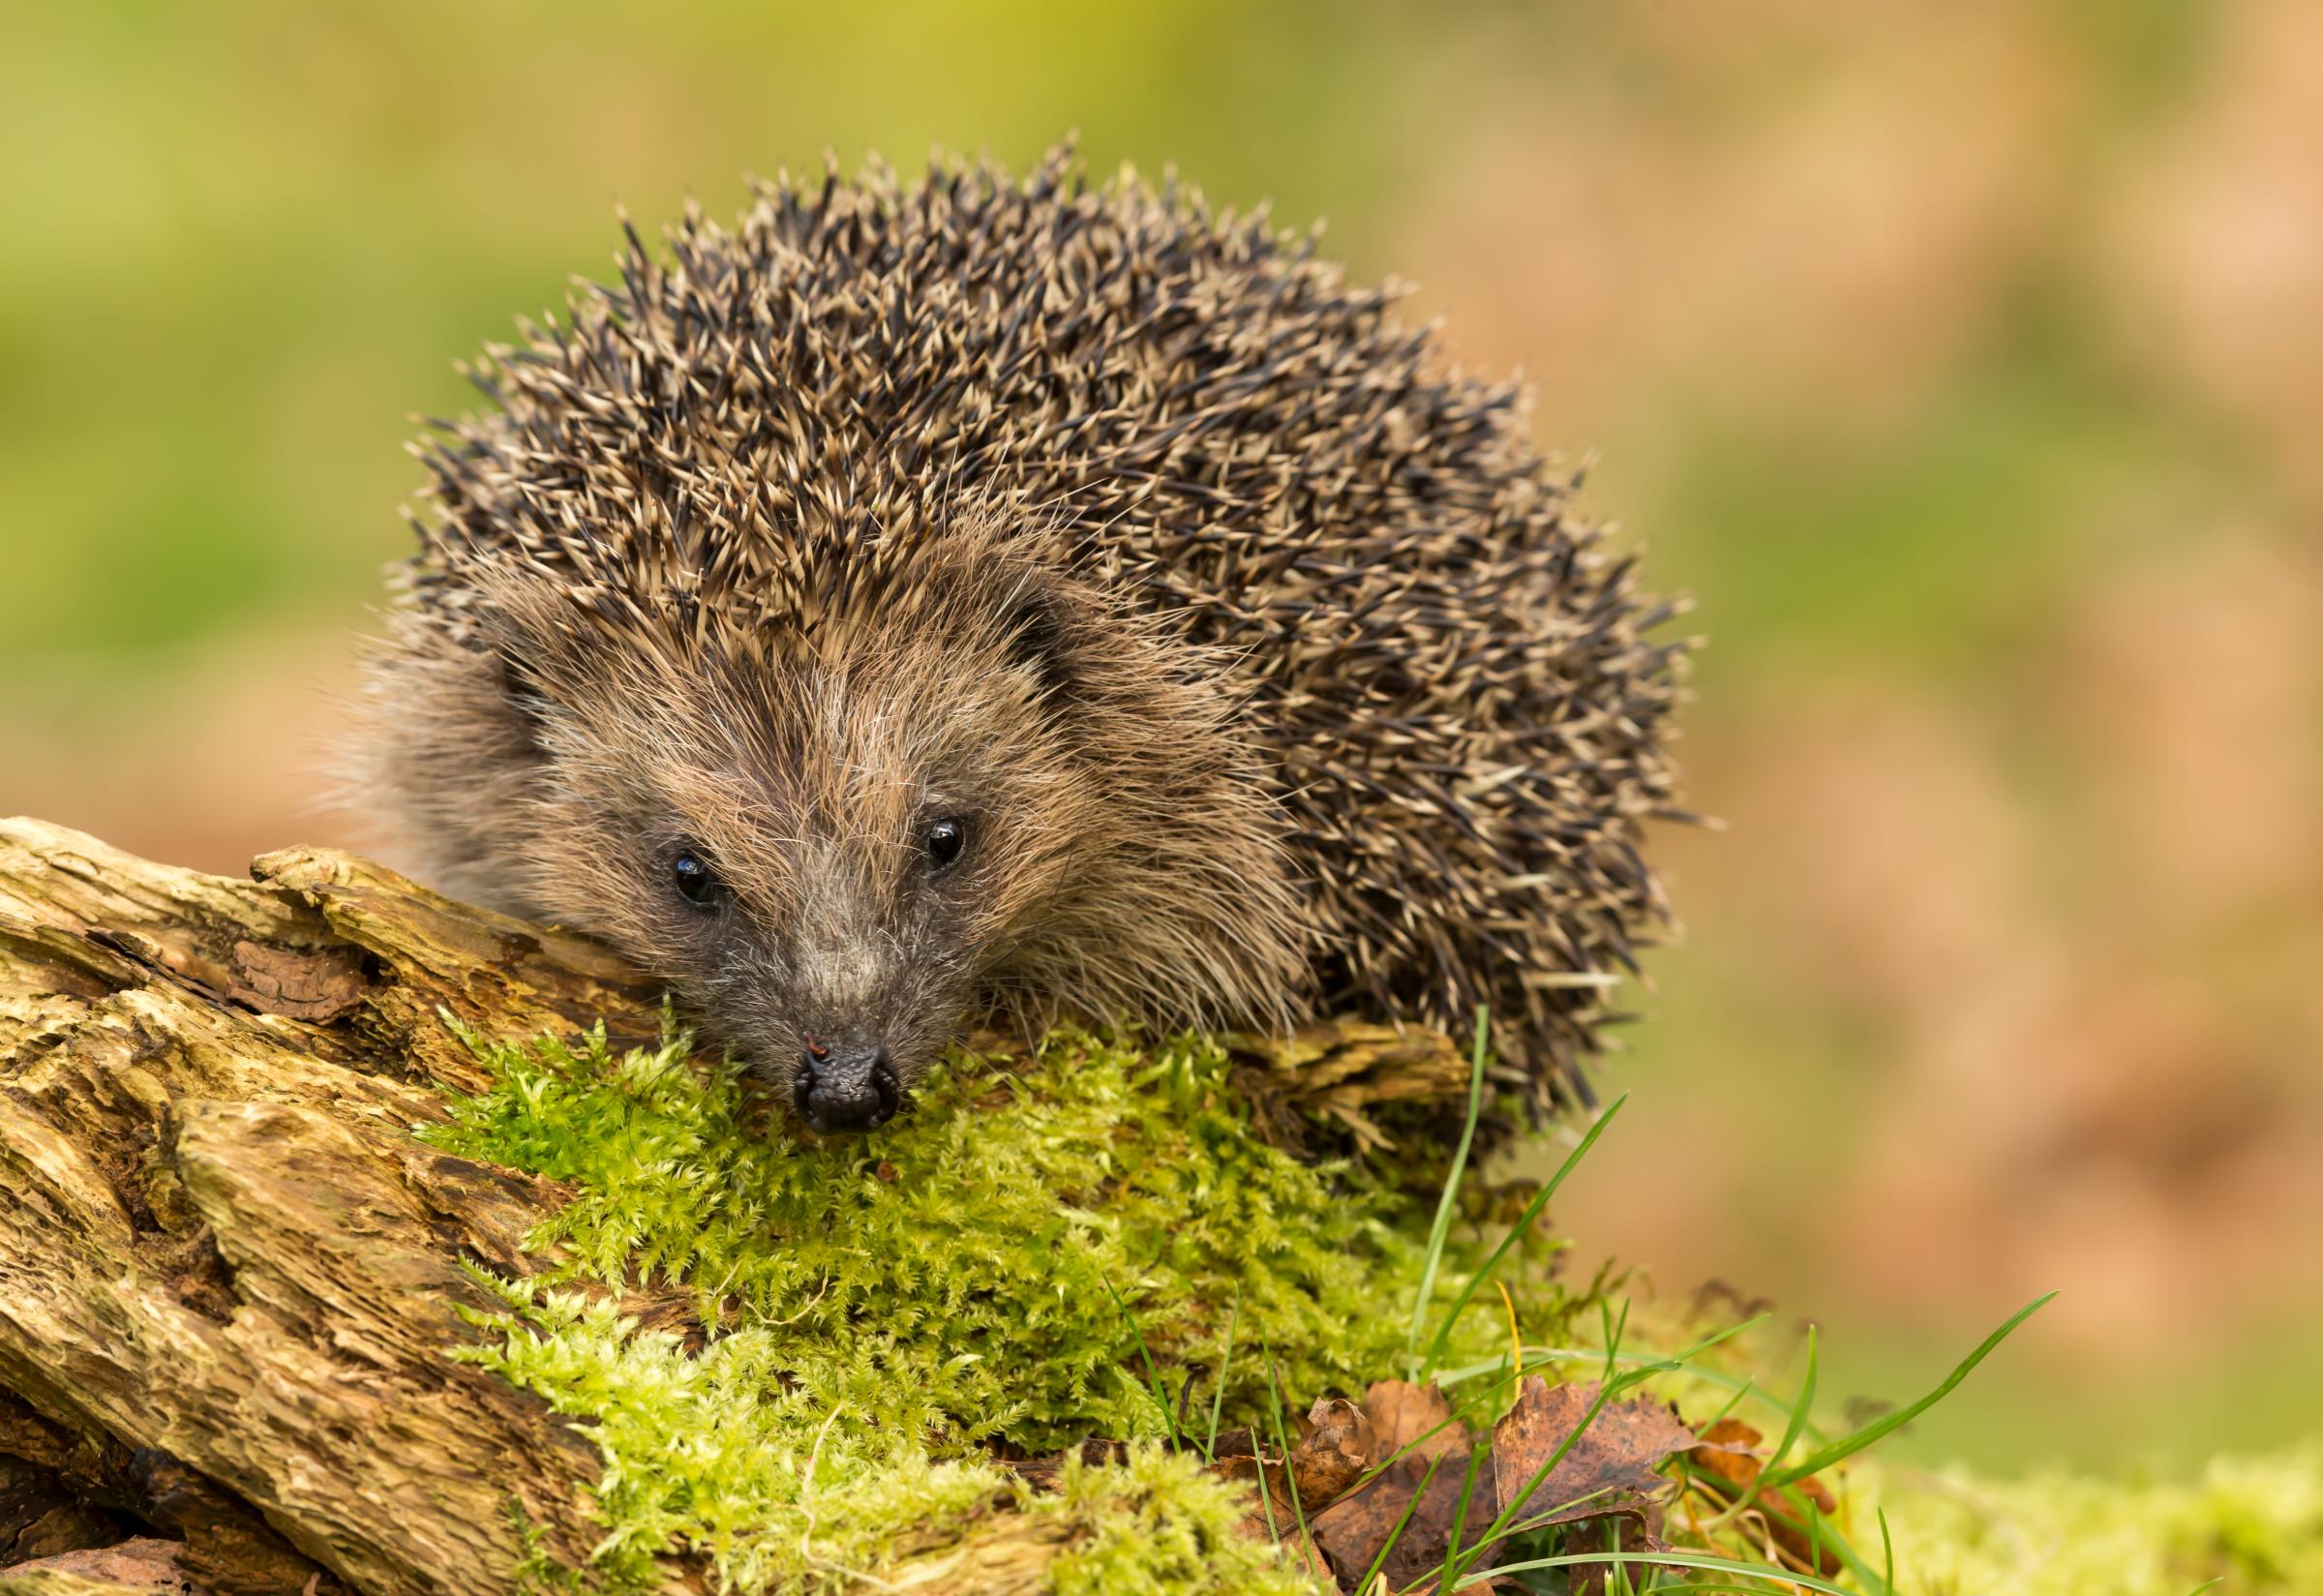 Hedgehogs have been spotted by conservationists monitoring threatened wildlife at Chester Zoos Nature Reserve.